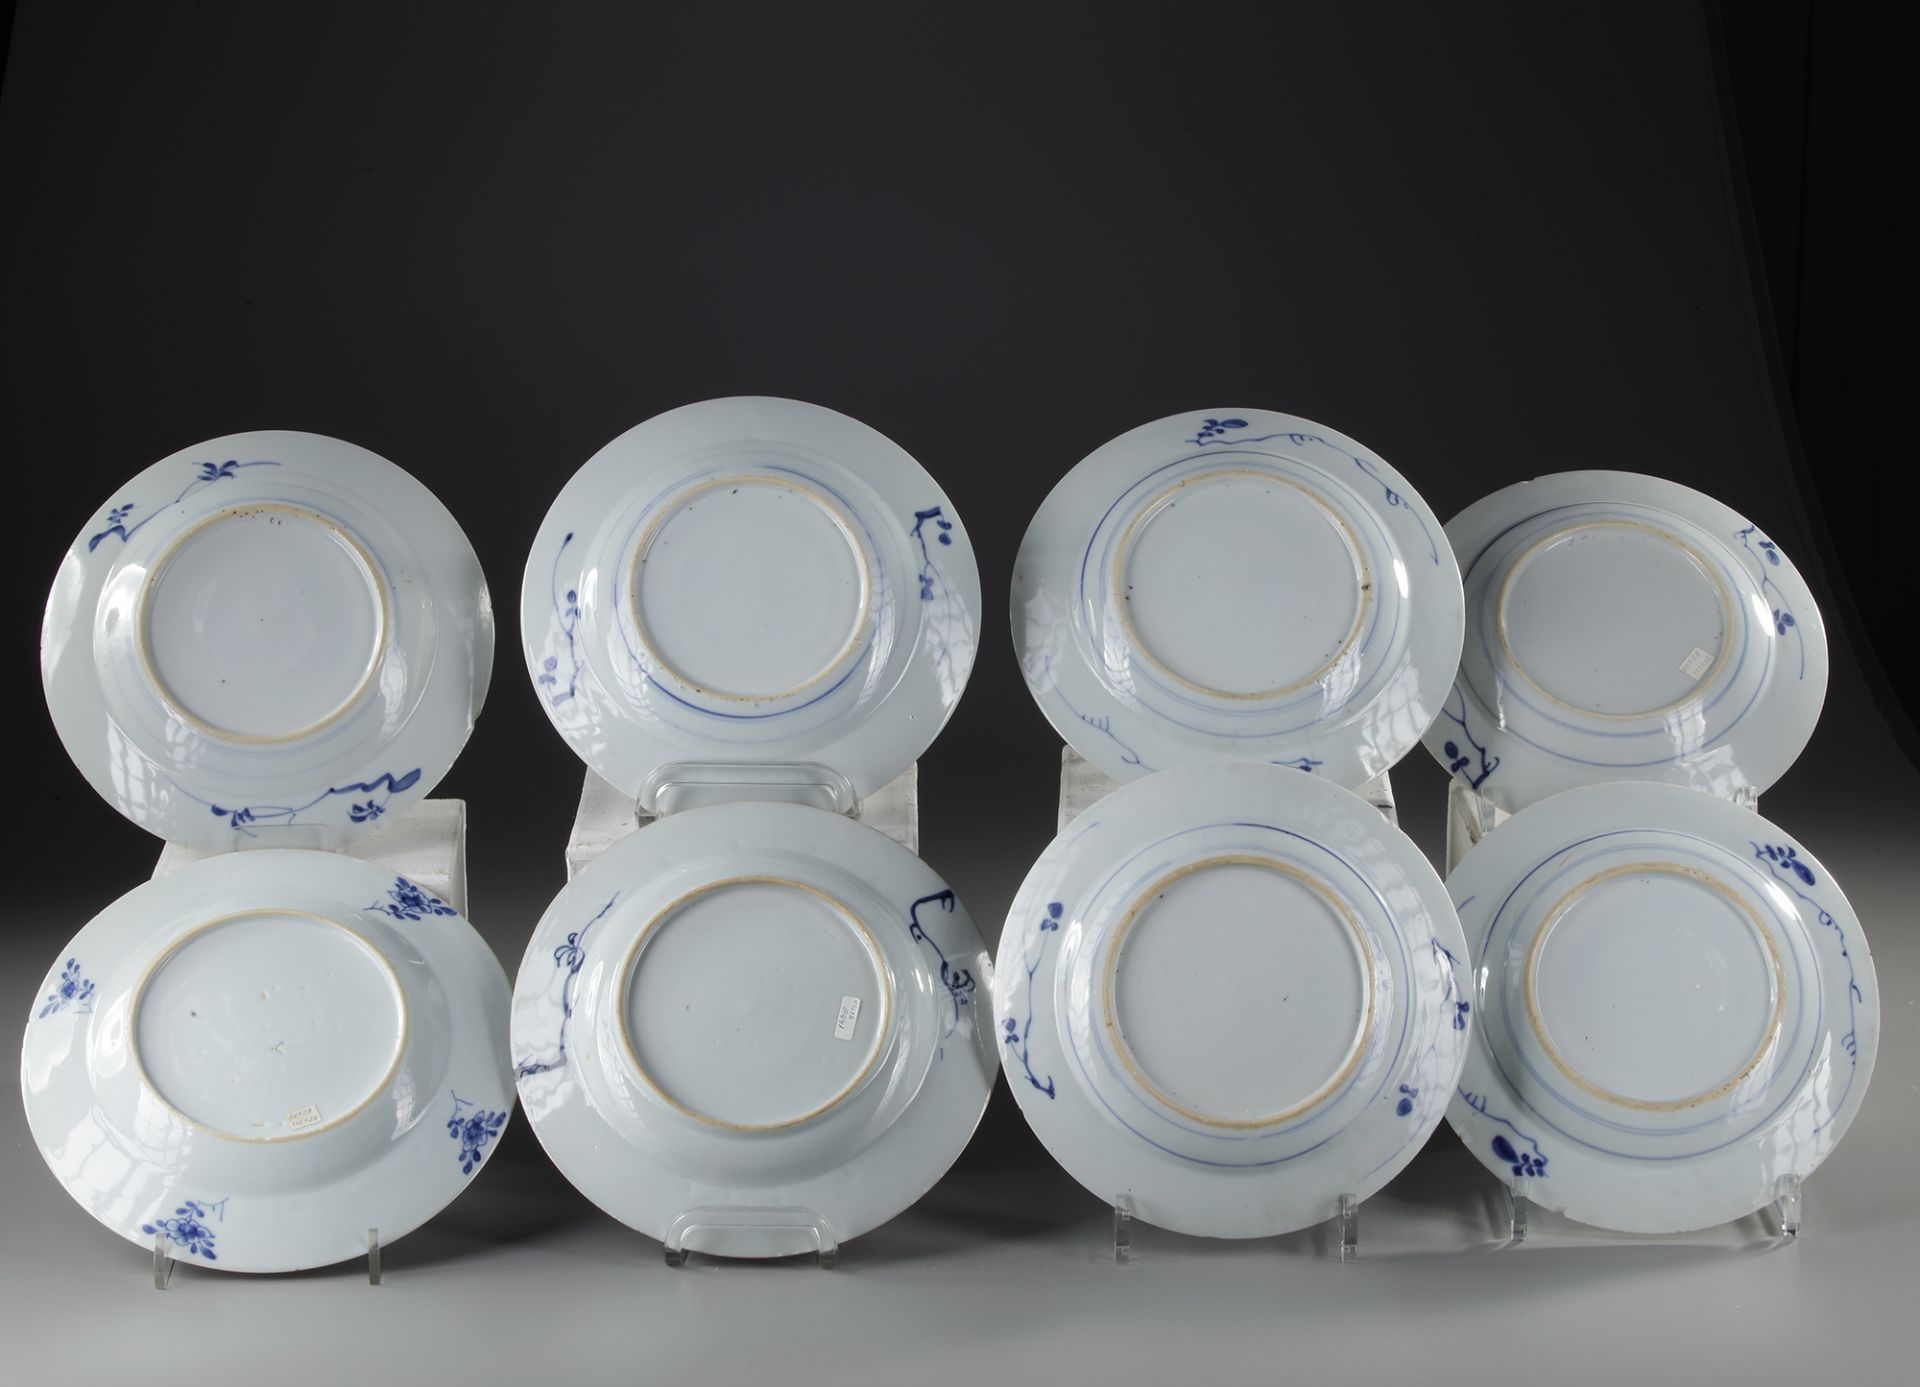 EIGHT CHINESE BLUE AND WHITE 'CUCKOO IN THE HOUSE' DISHES, 18TH CENTURY - Image 2 of 2